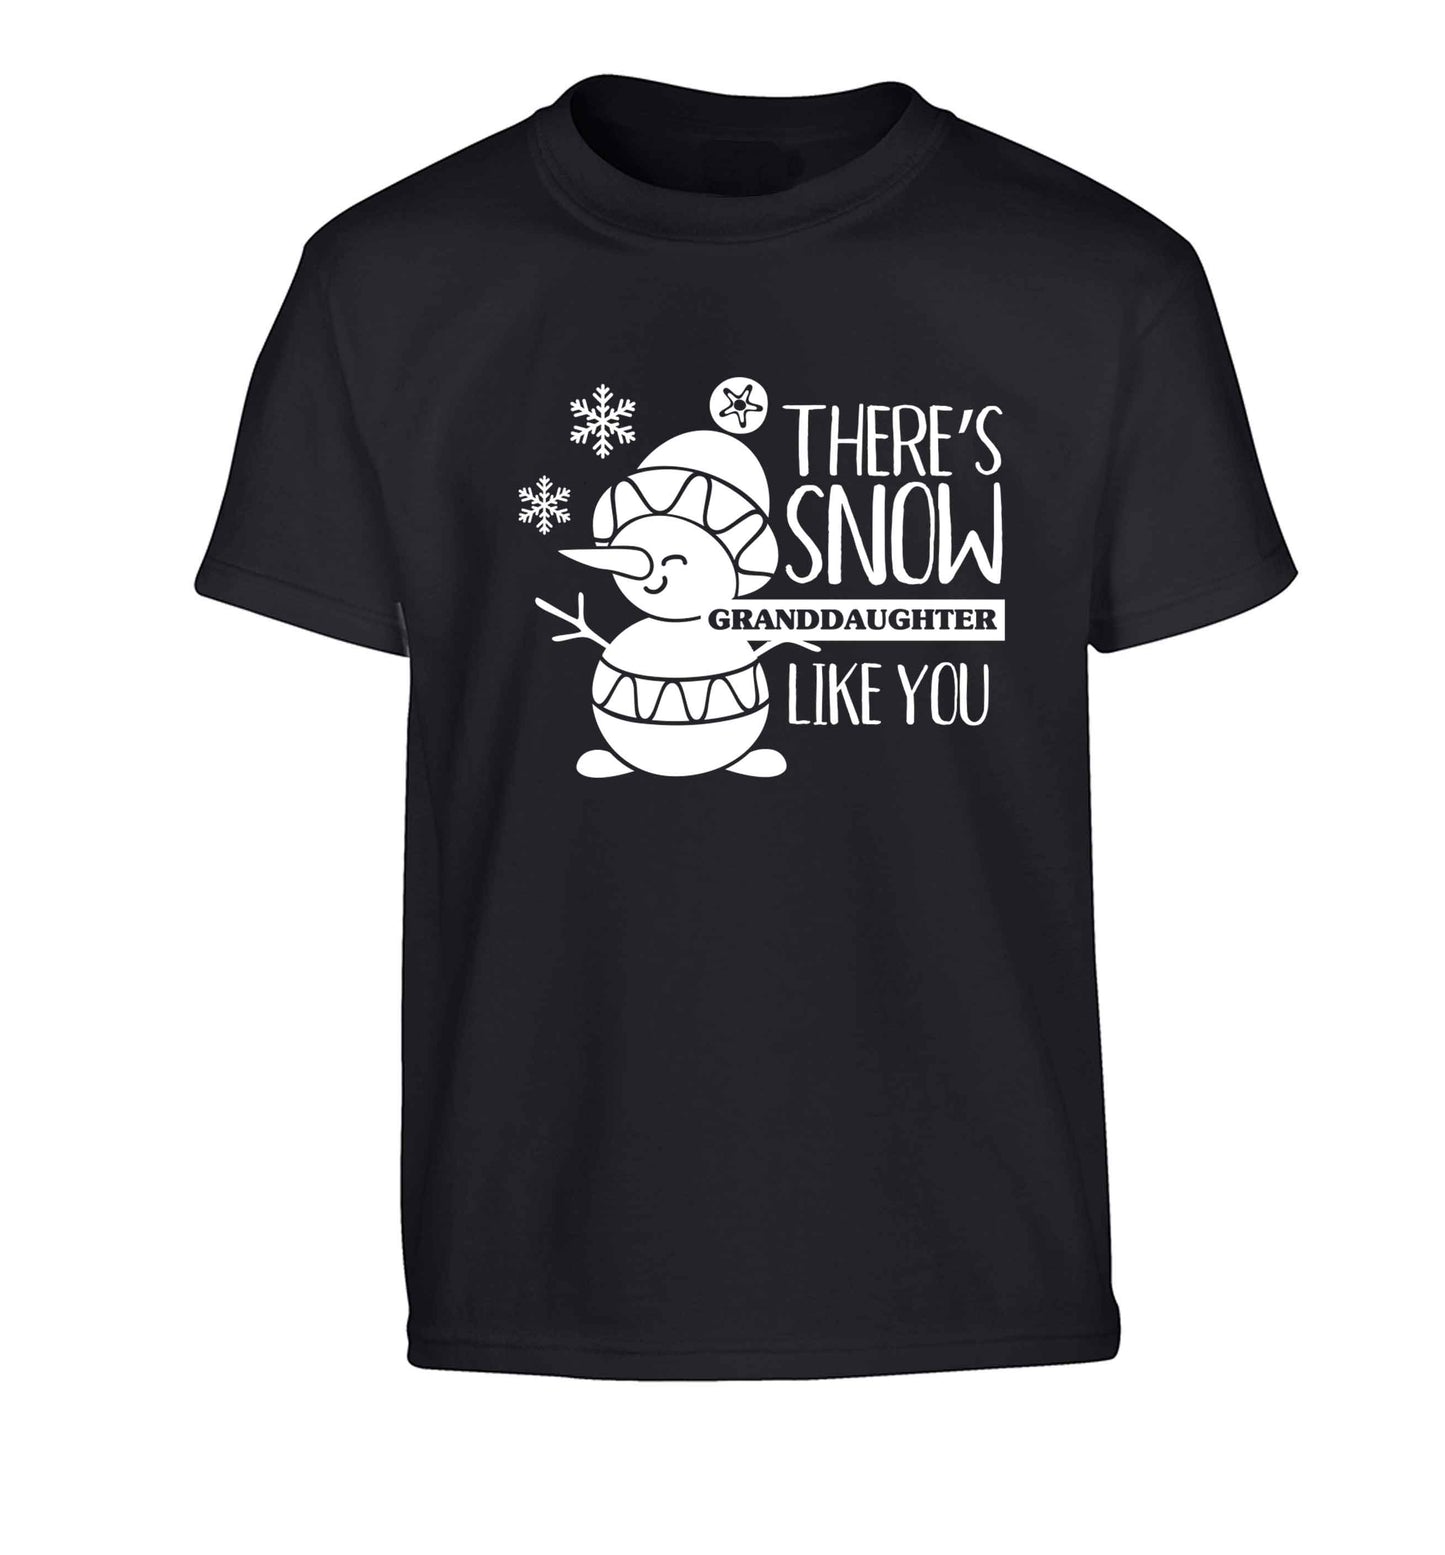 There's snow granddaughter like you Children's black Tshirt 12-13 Years